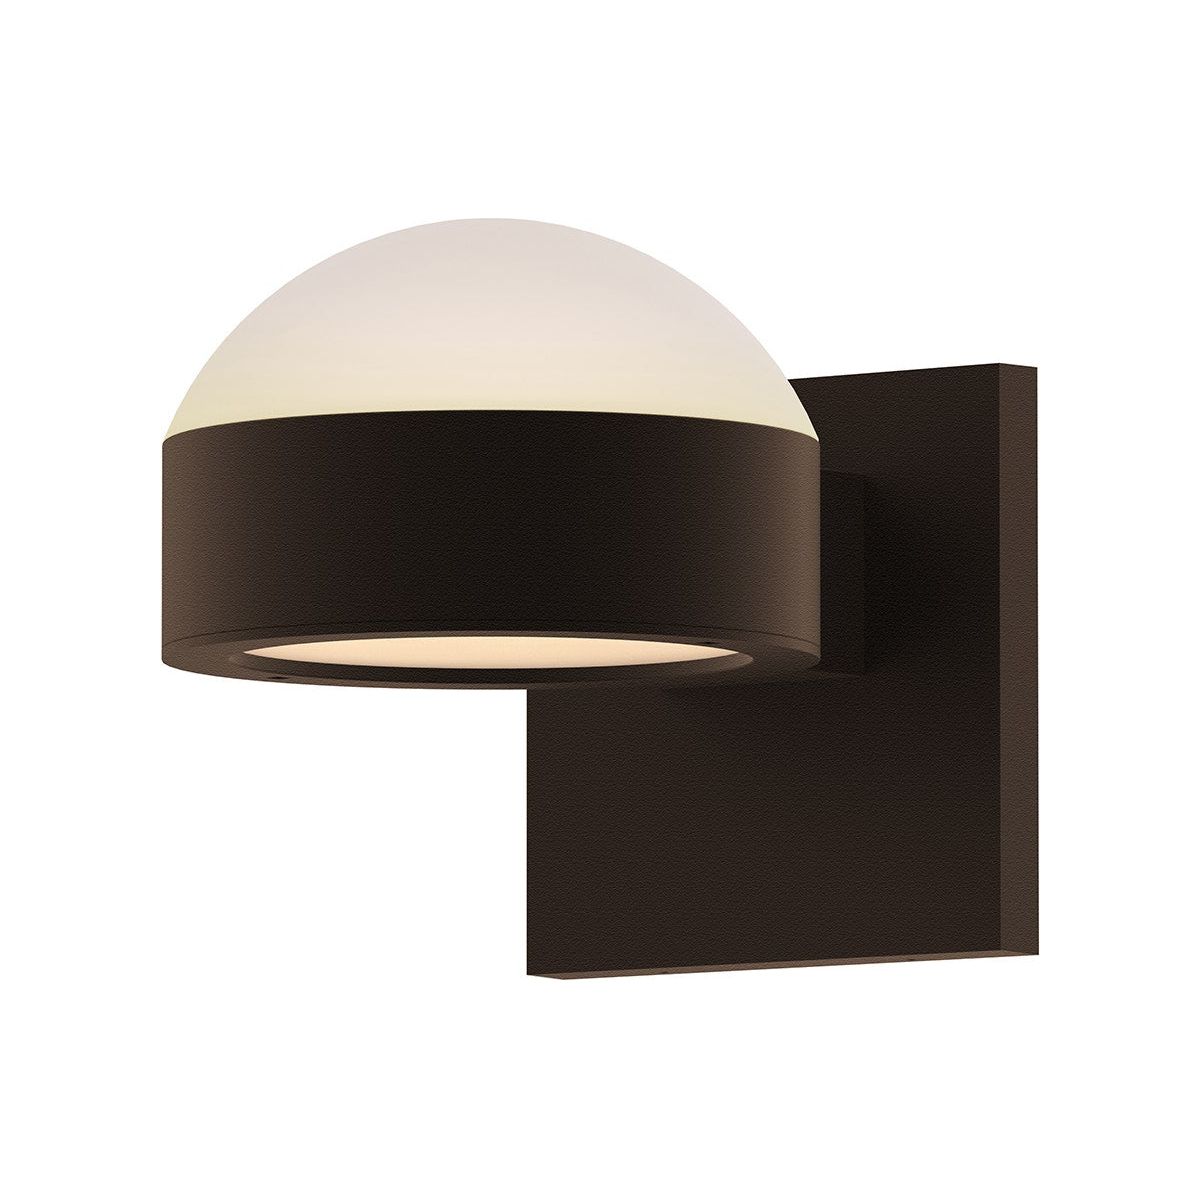 REALS Up/Down LED Sconce with Dome Top and Plate Bottom